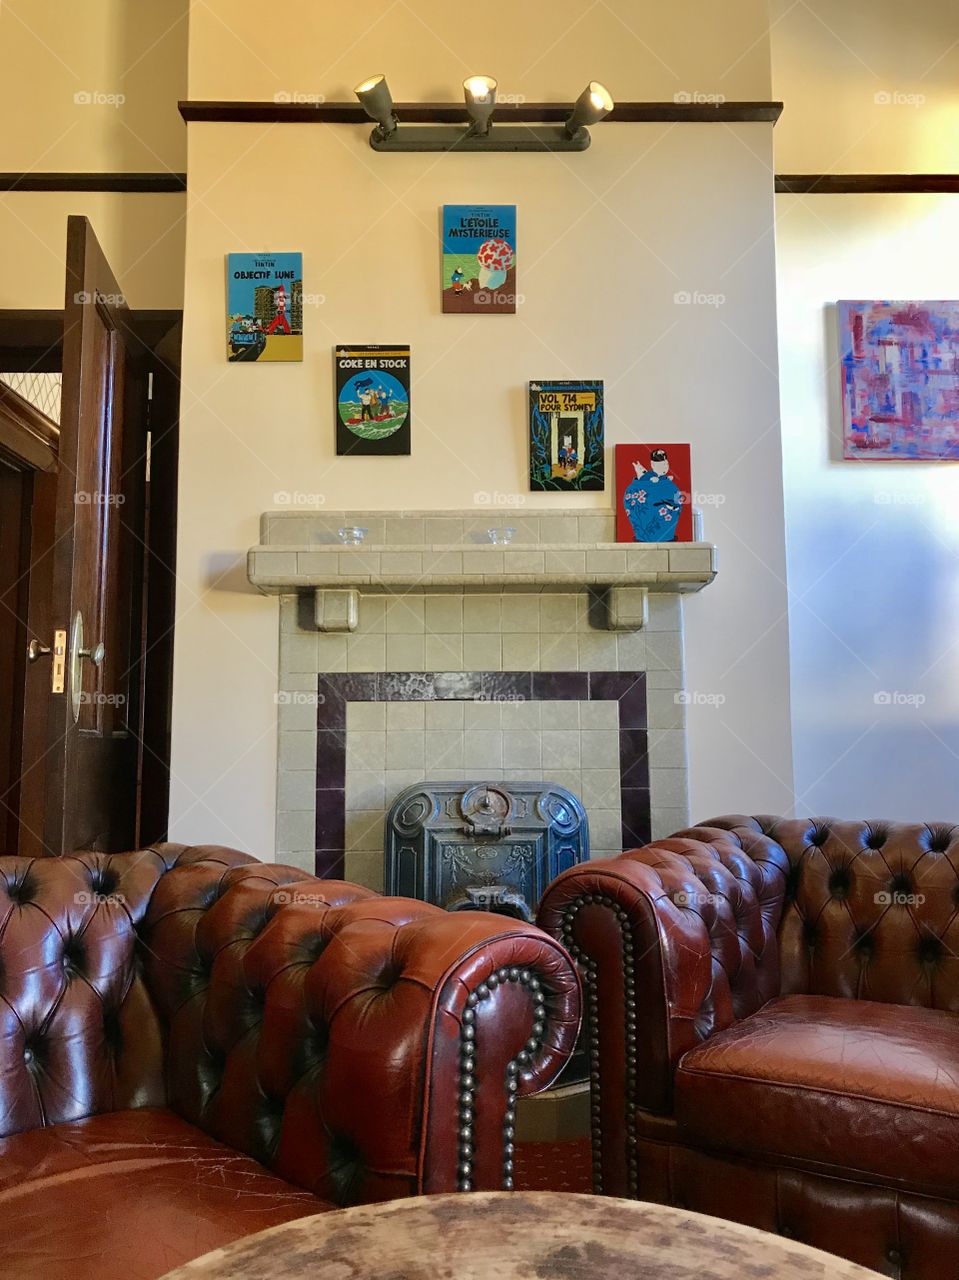 Chesterfield lounges and cast iron fireplace. Leura, Blue Mountains NSW Australia 